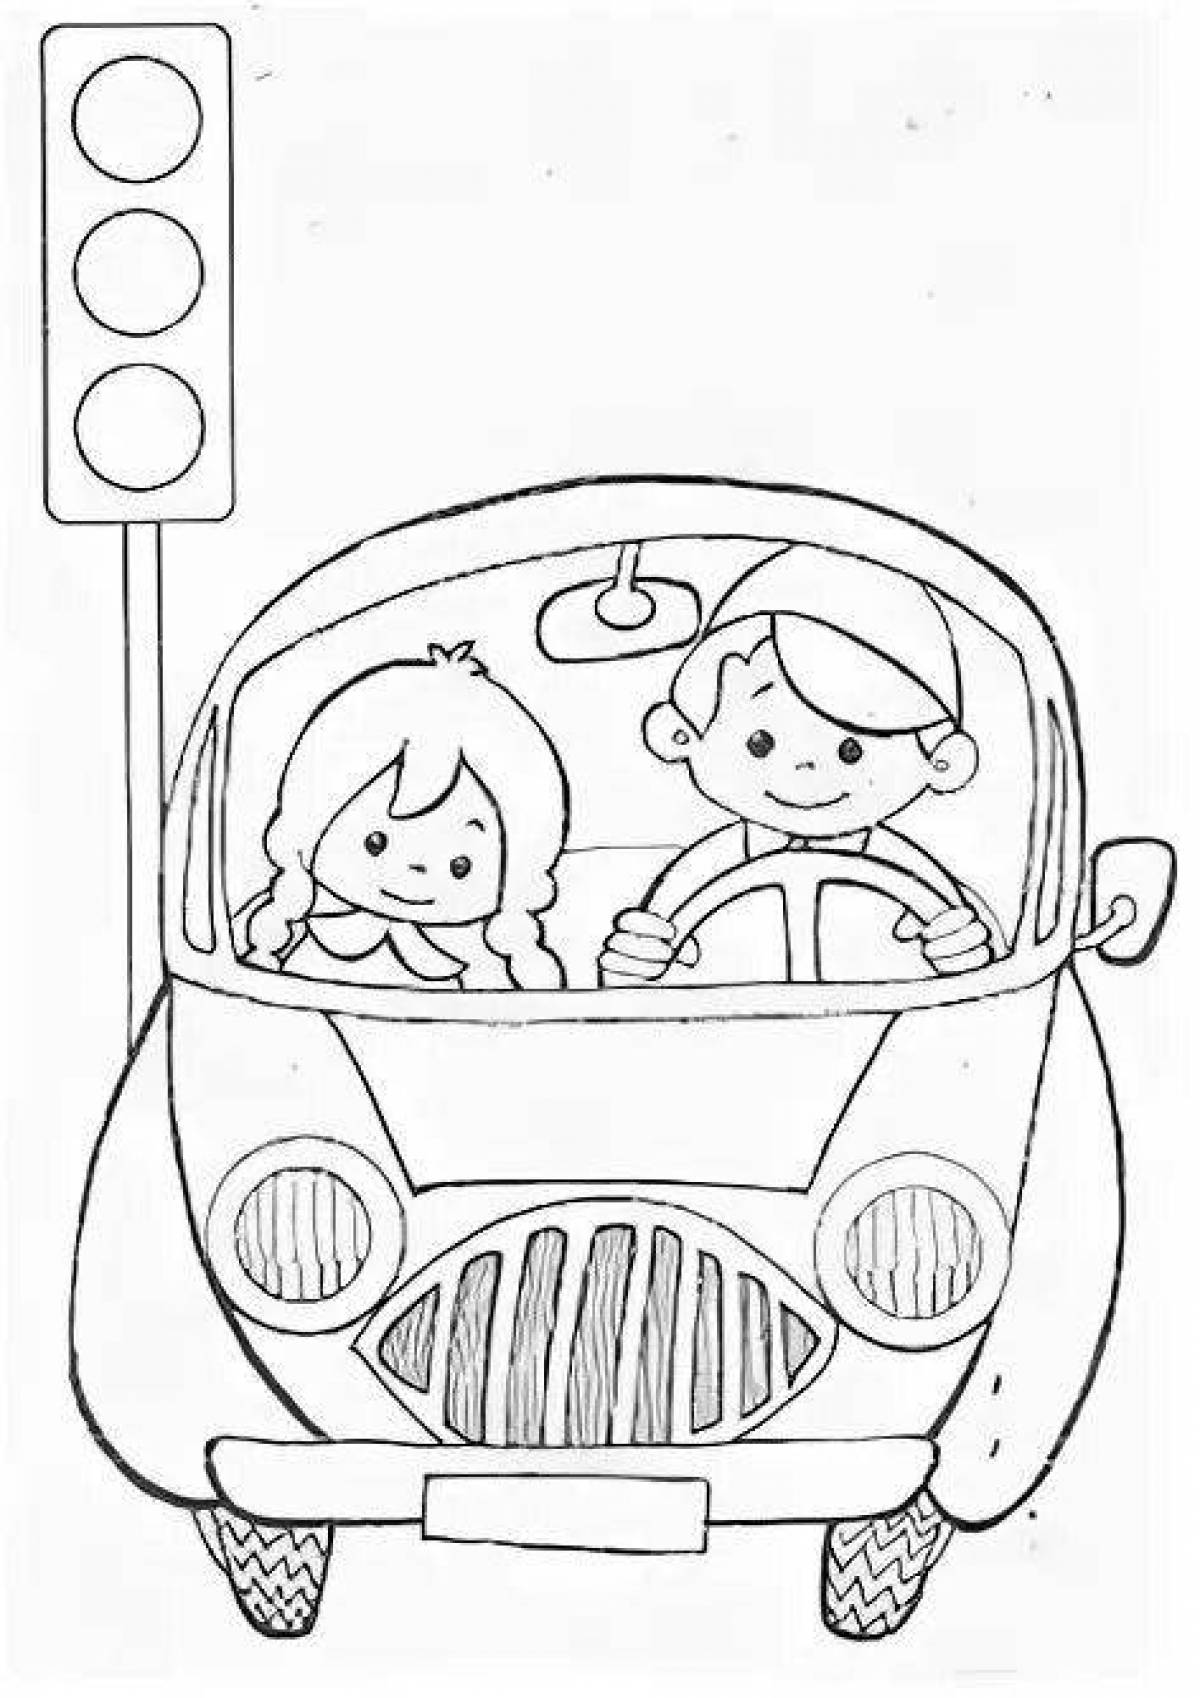 Fun coloring book traffic rules for children 5-6 years old